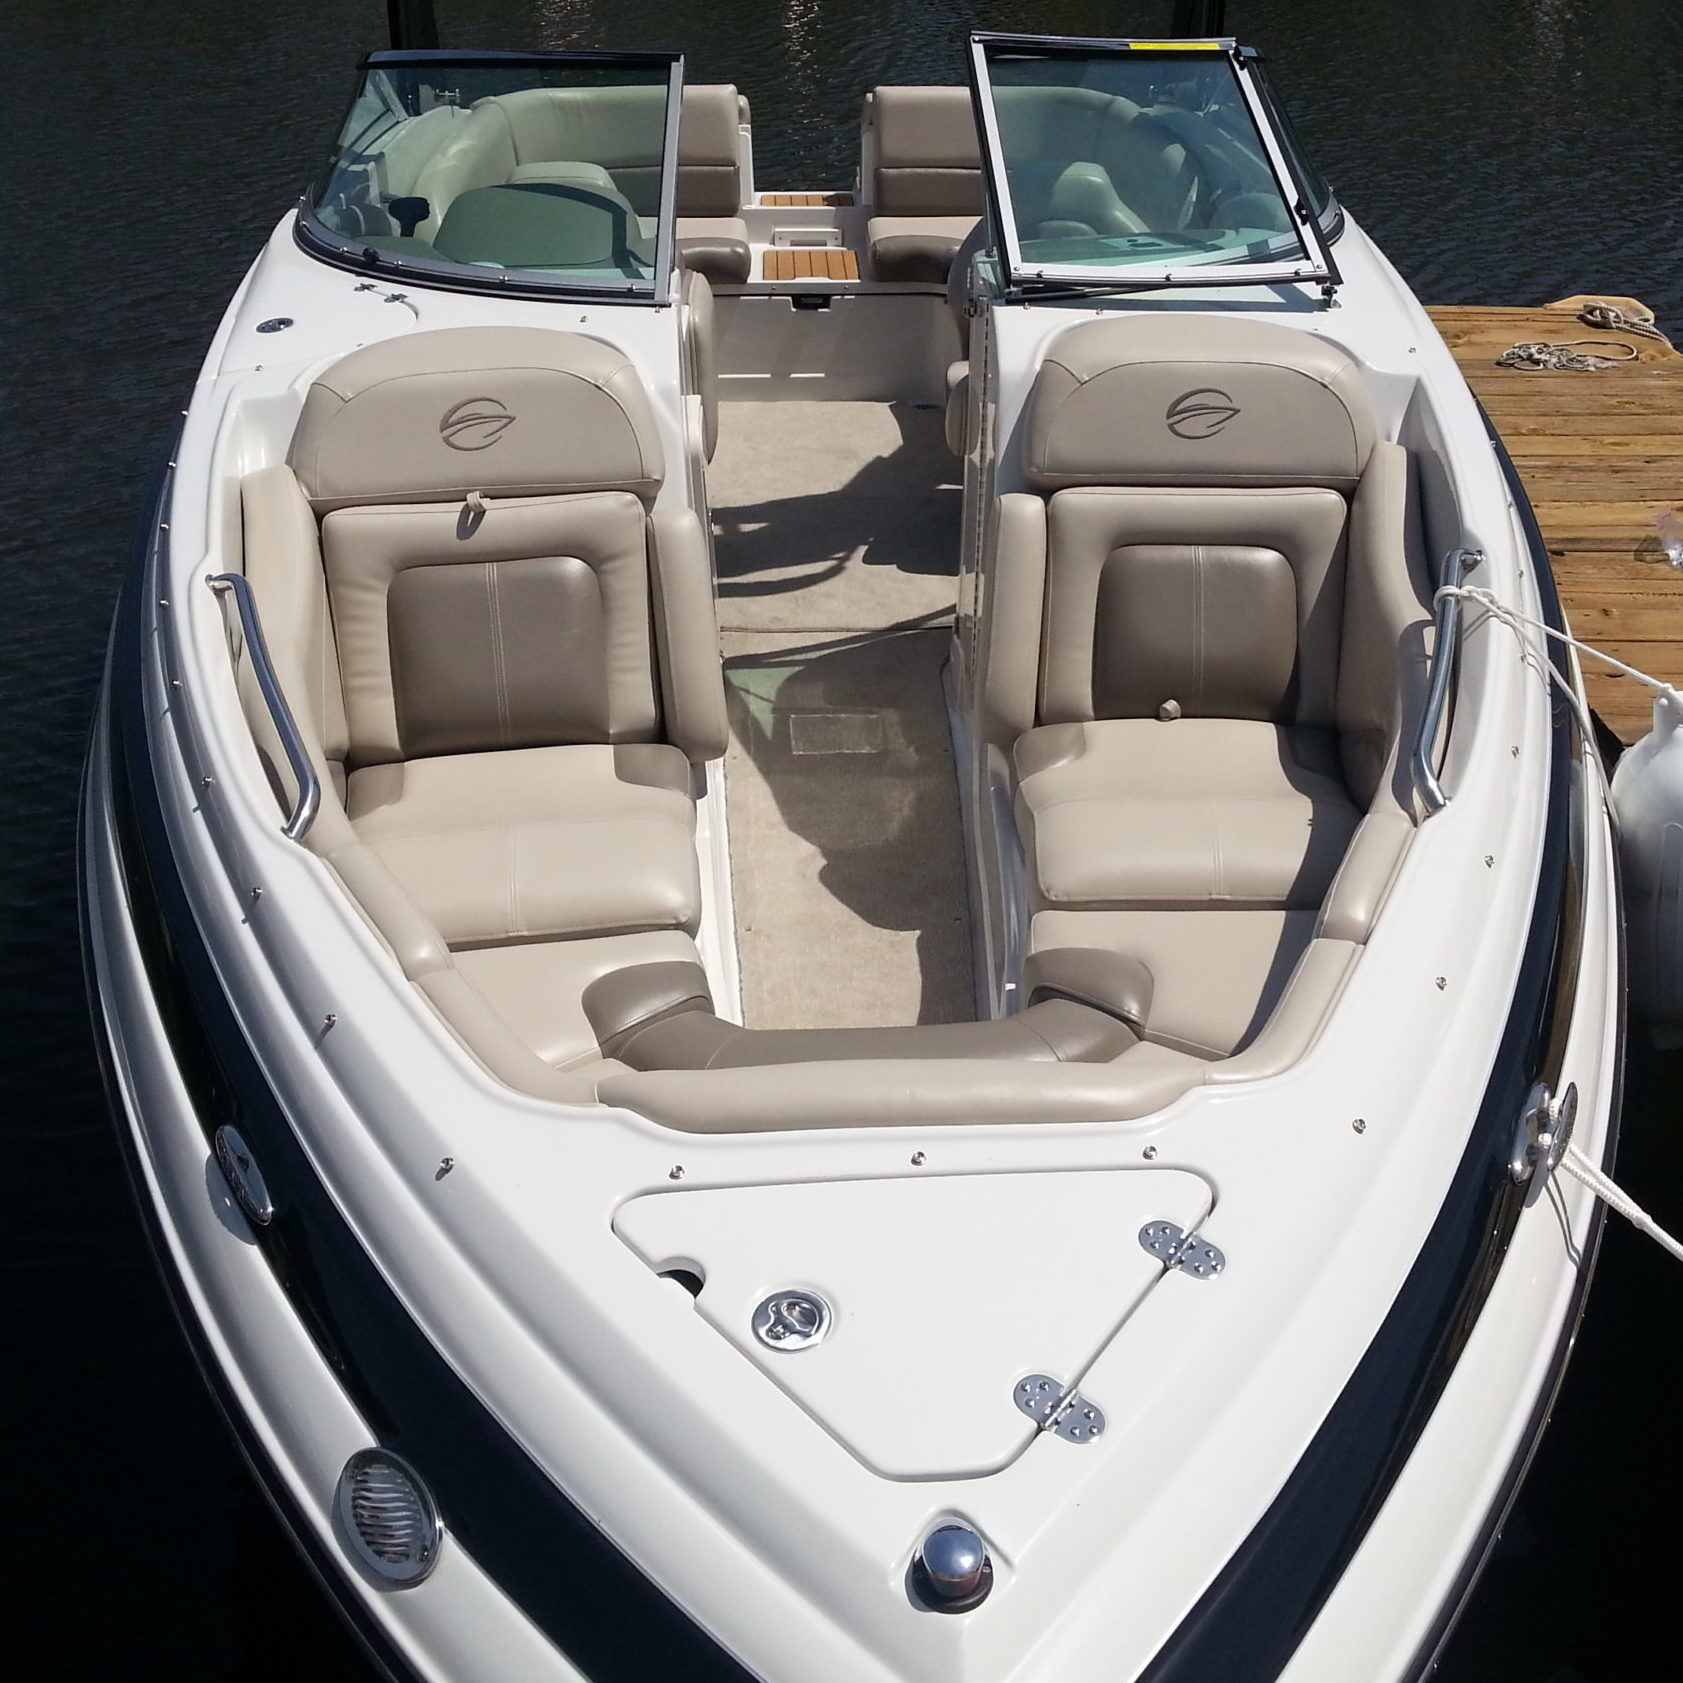 Crownline Boat Reviews, unresolved issues